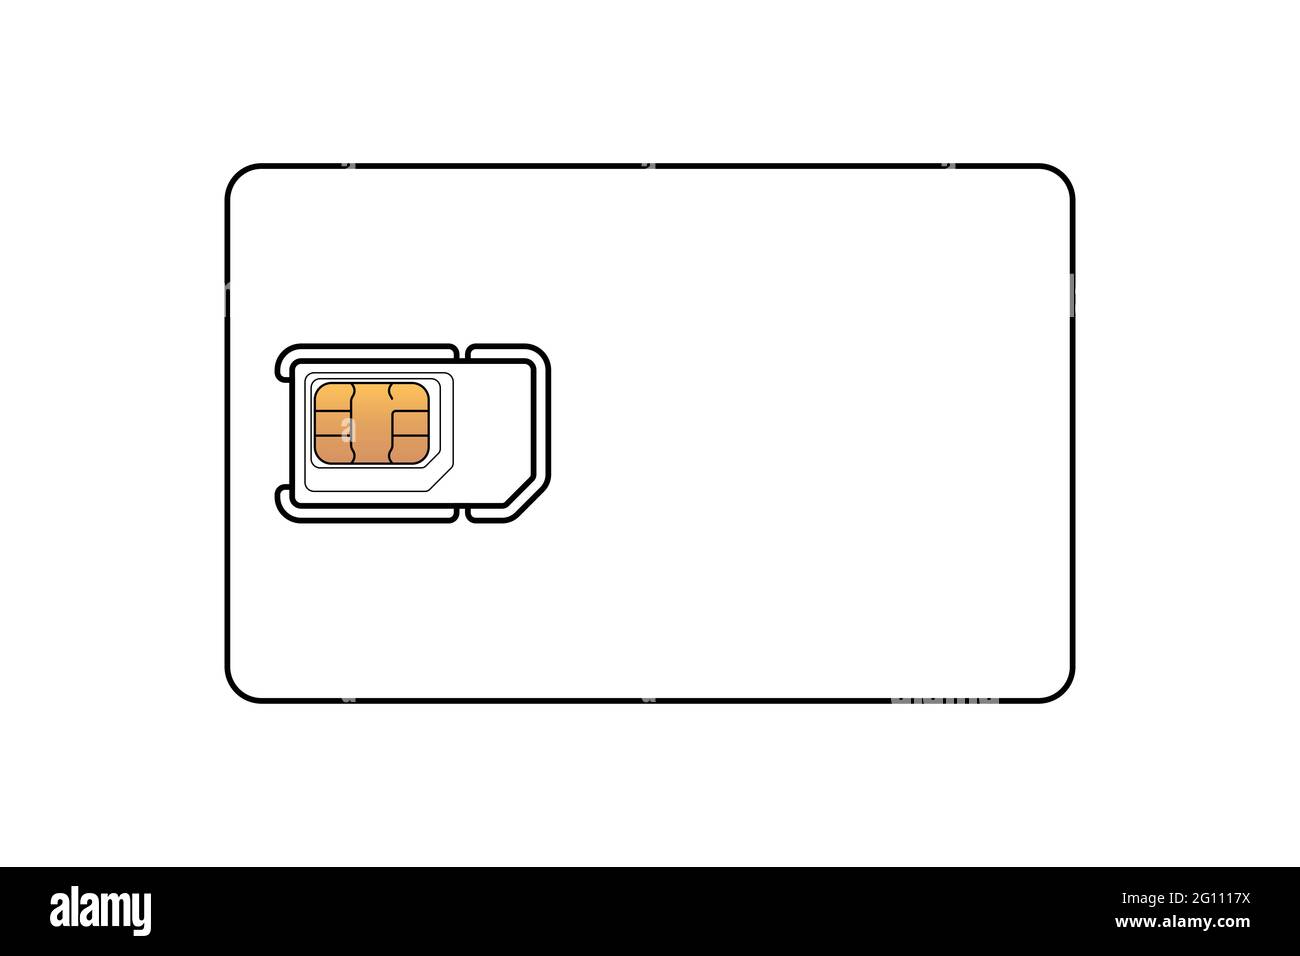 Mobile phone sim card with standard, micro and nano EMV chip linear design template. Plastic card symbol mockup on white background vector isolated illustration Stock Vector